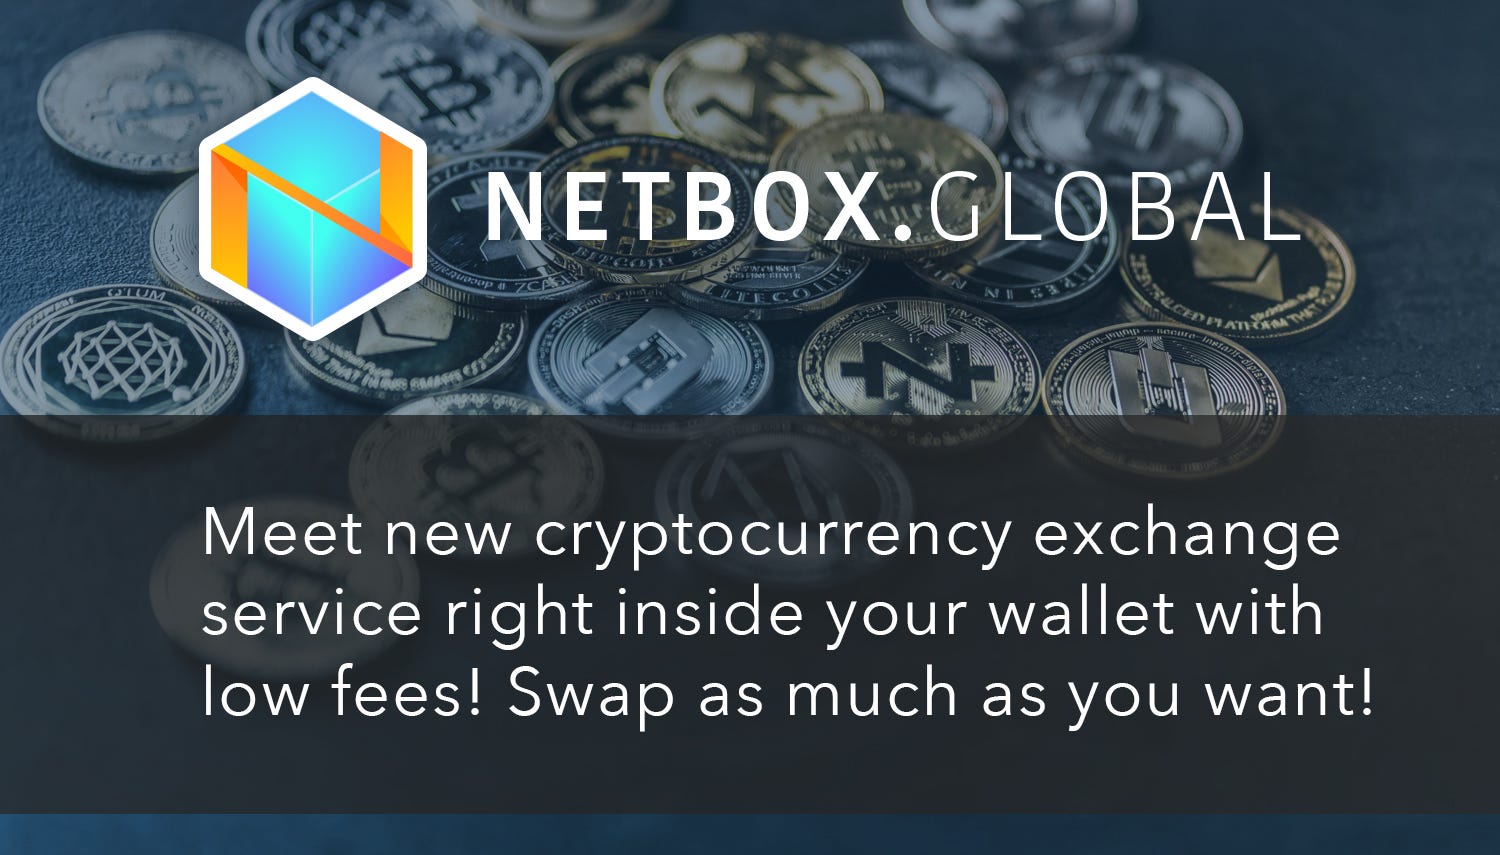 New cryptocurrency exchange service right inside Netbox.Wallet